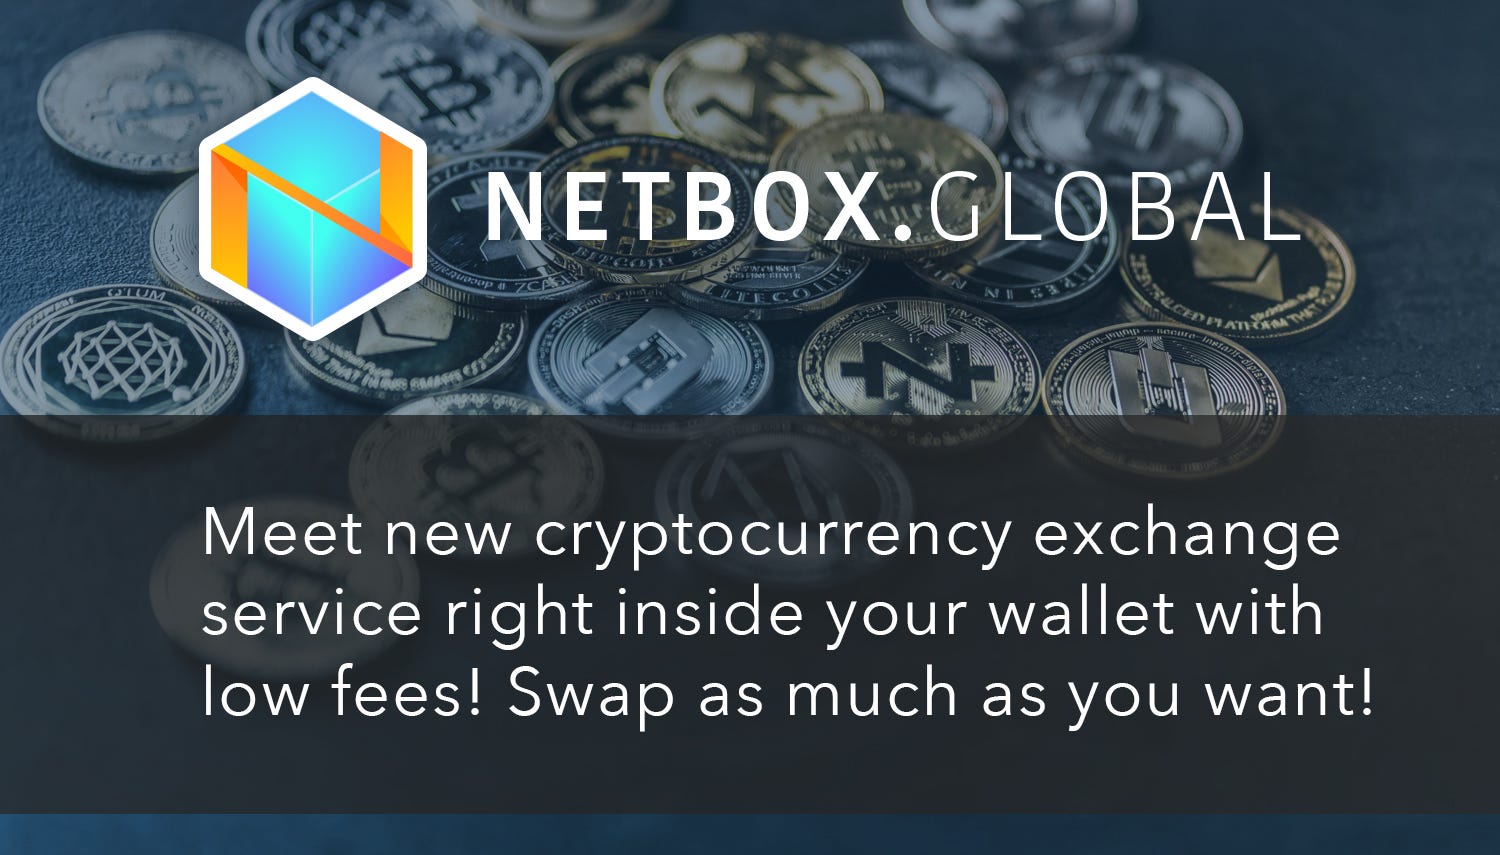 New cryptocurrency exchange service right inside Netbox.Wallet